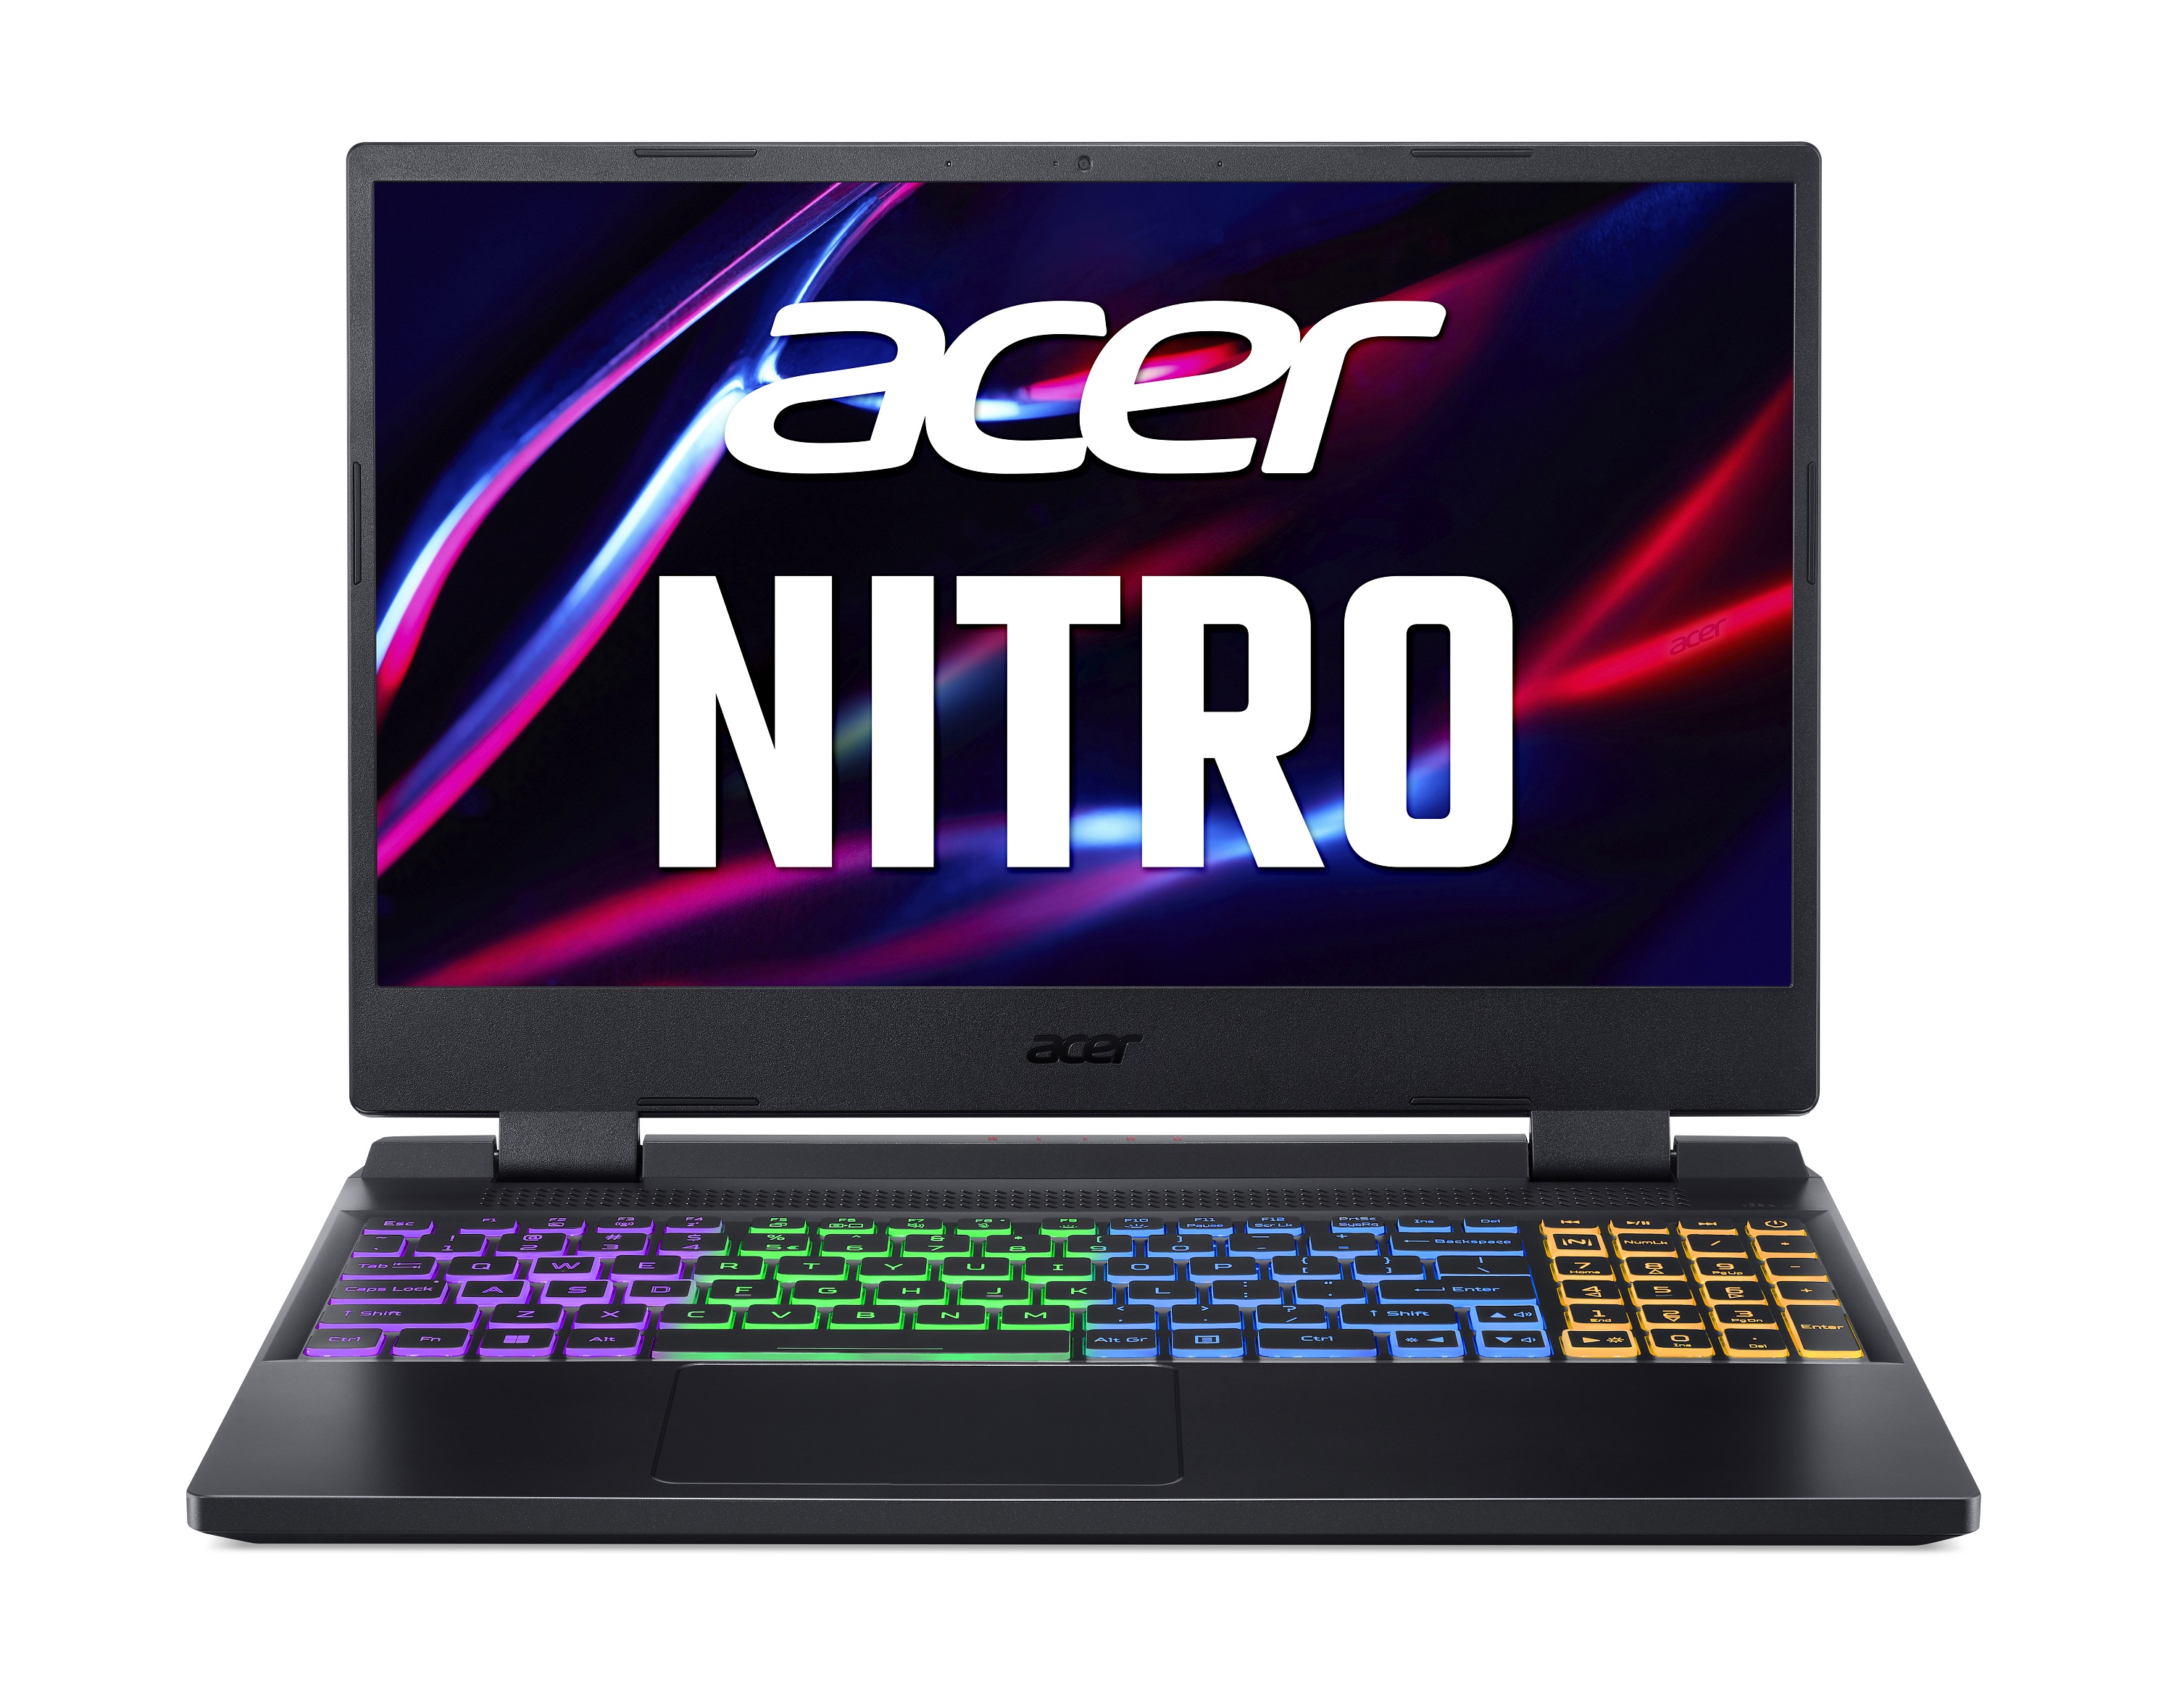 Acer launches all-new refresh Acer Nitro 5 with 12th Gen Intel® Core i5 and Core i7 processors and NVIDIA® GeForce RTX™ 30 Series GPUs for a powerful gaming performance